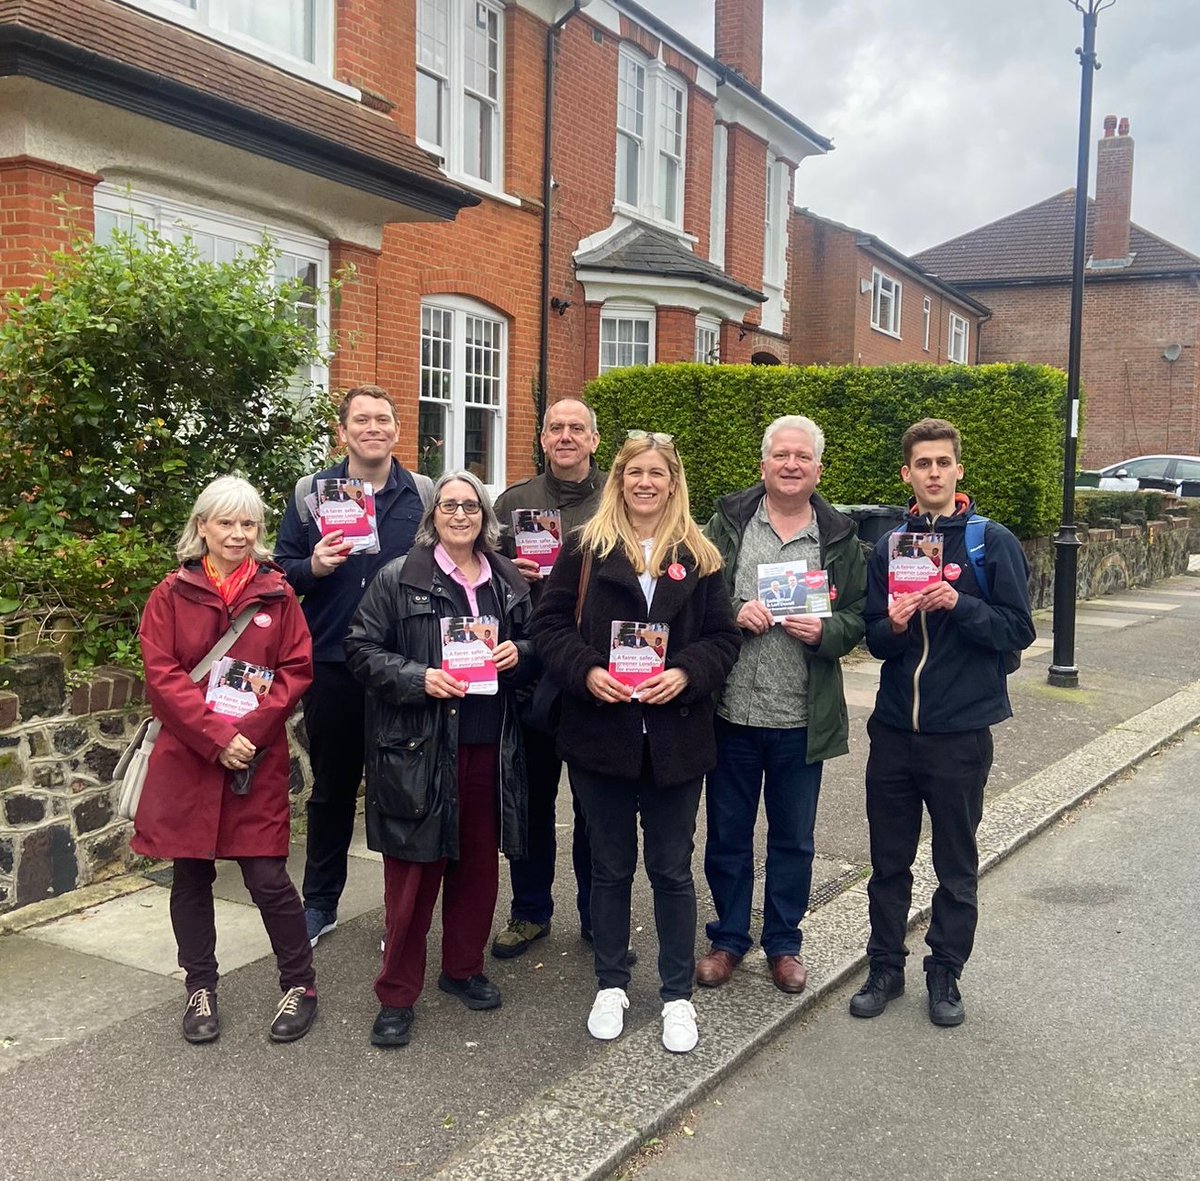 Strong support for @SadiqKhan and @LondonLabour in #Sydenham this evening. We’ve seen the damage the Conservatives have done to our country, let’s not let them do the same to London. #VoteLabour on 2nd May.